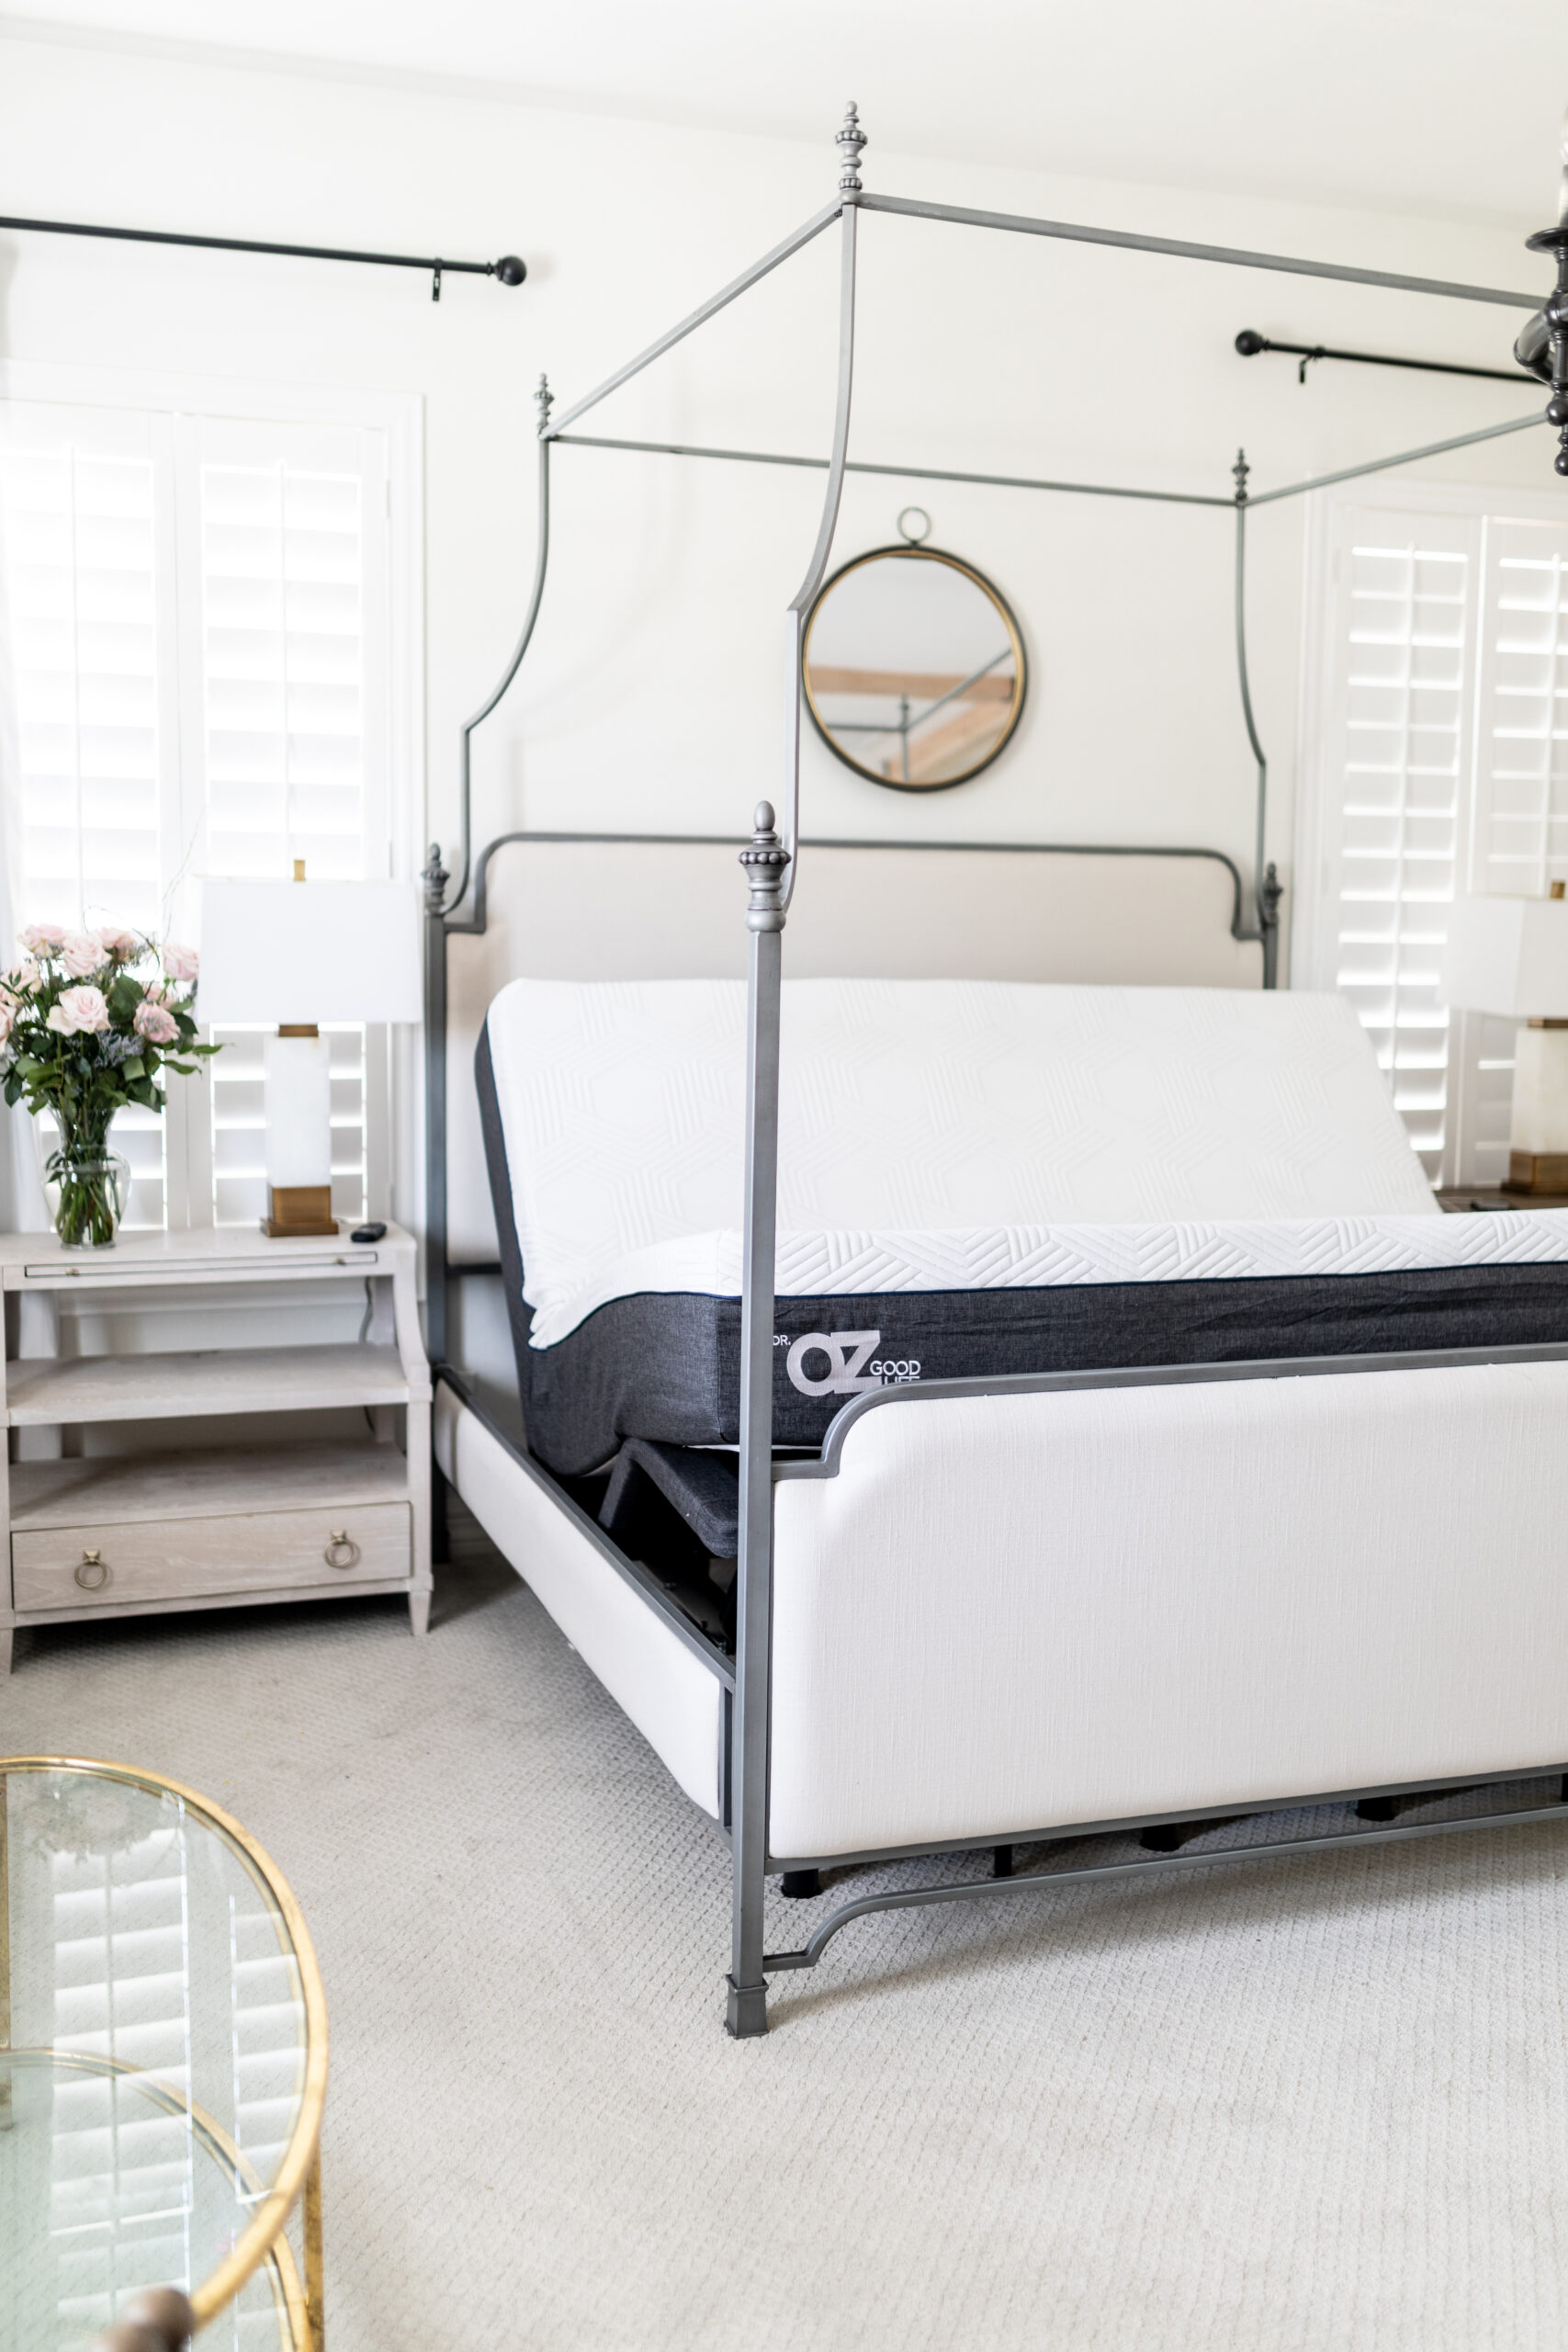 Sleep System bed from Dr. Oz 